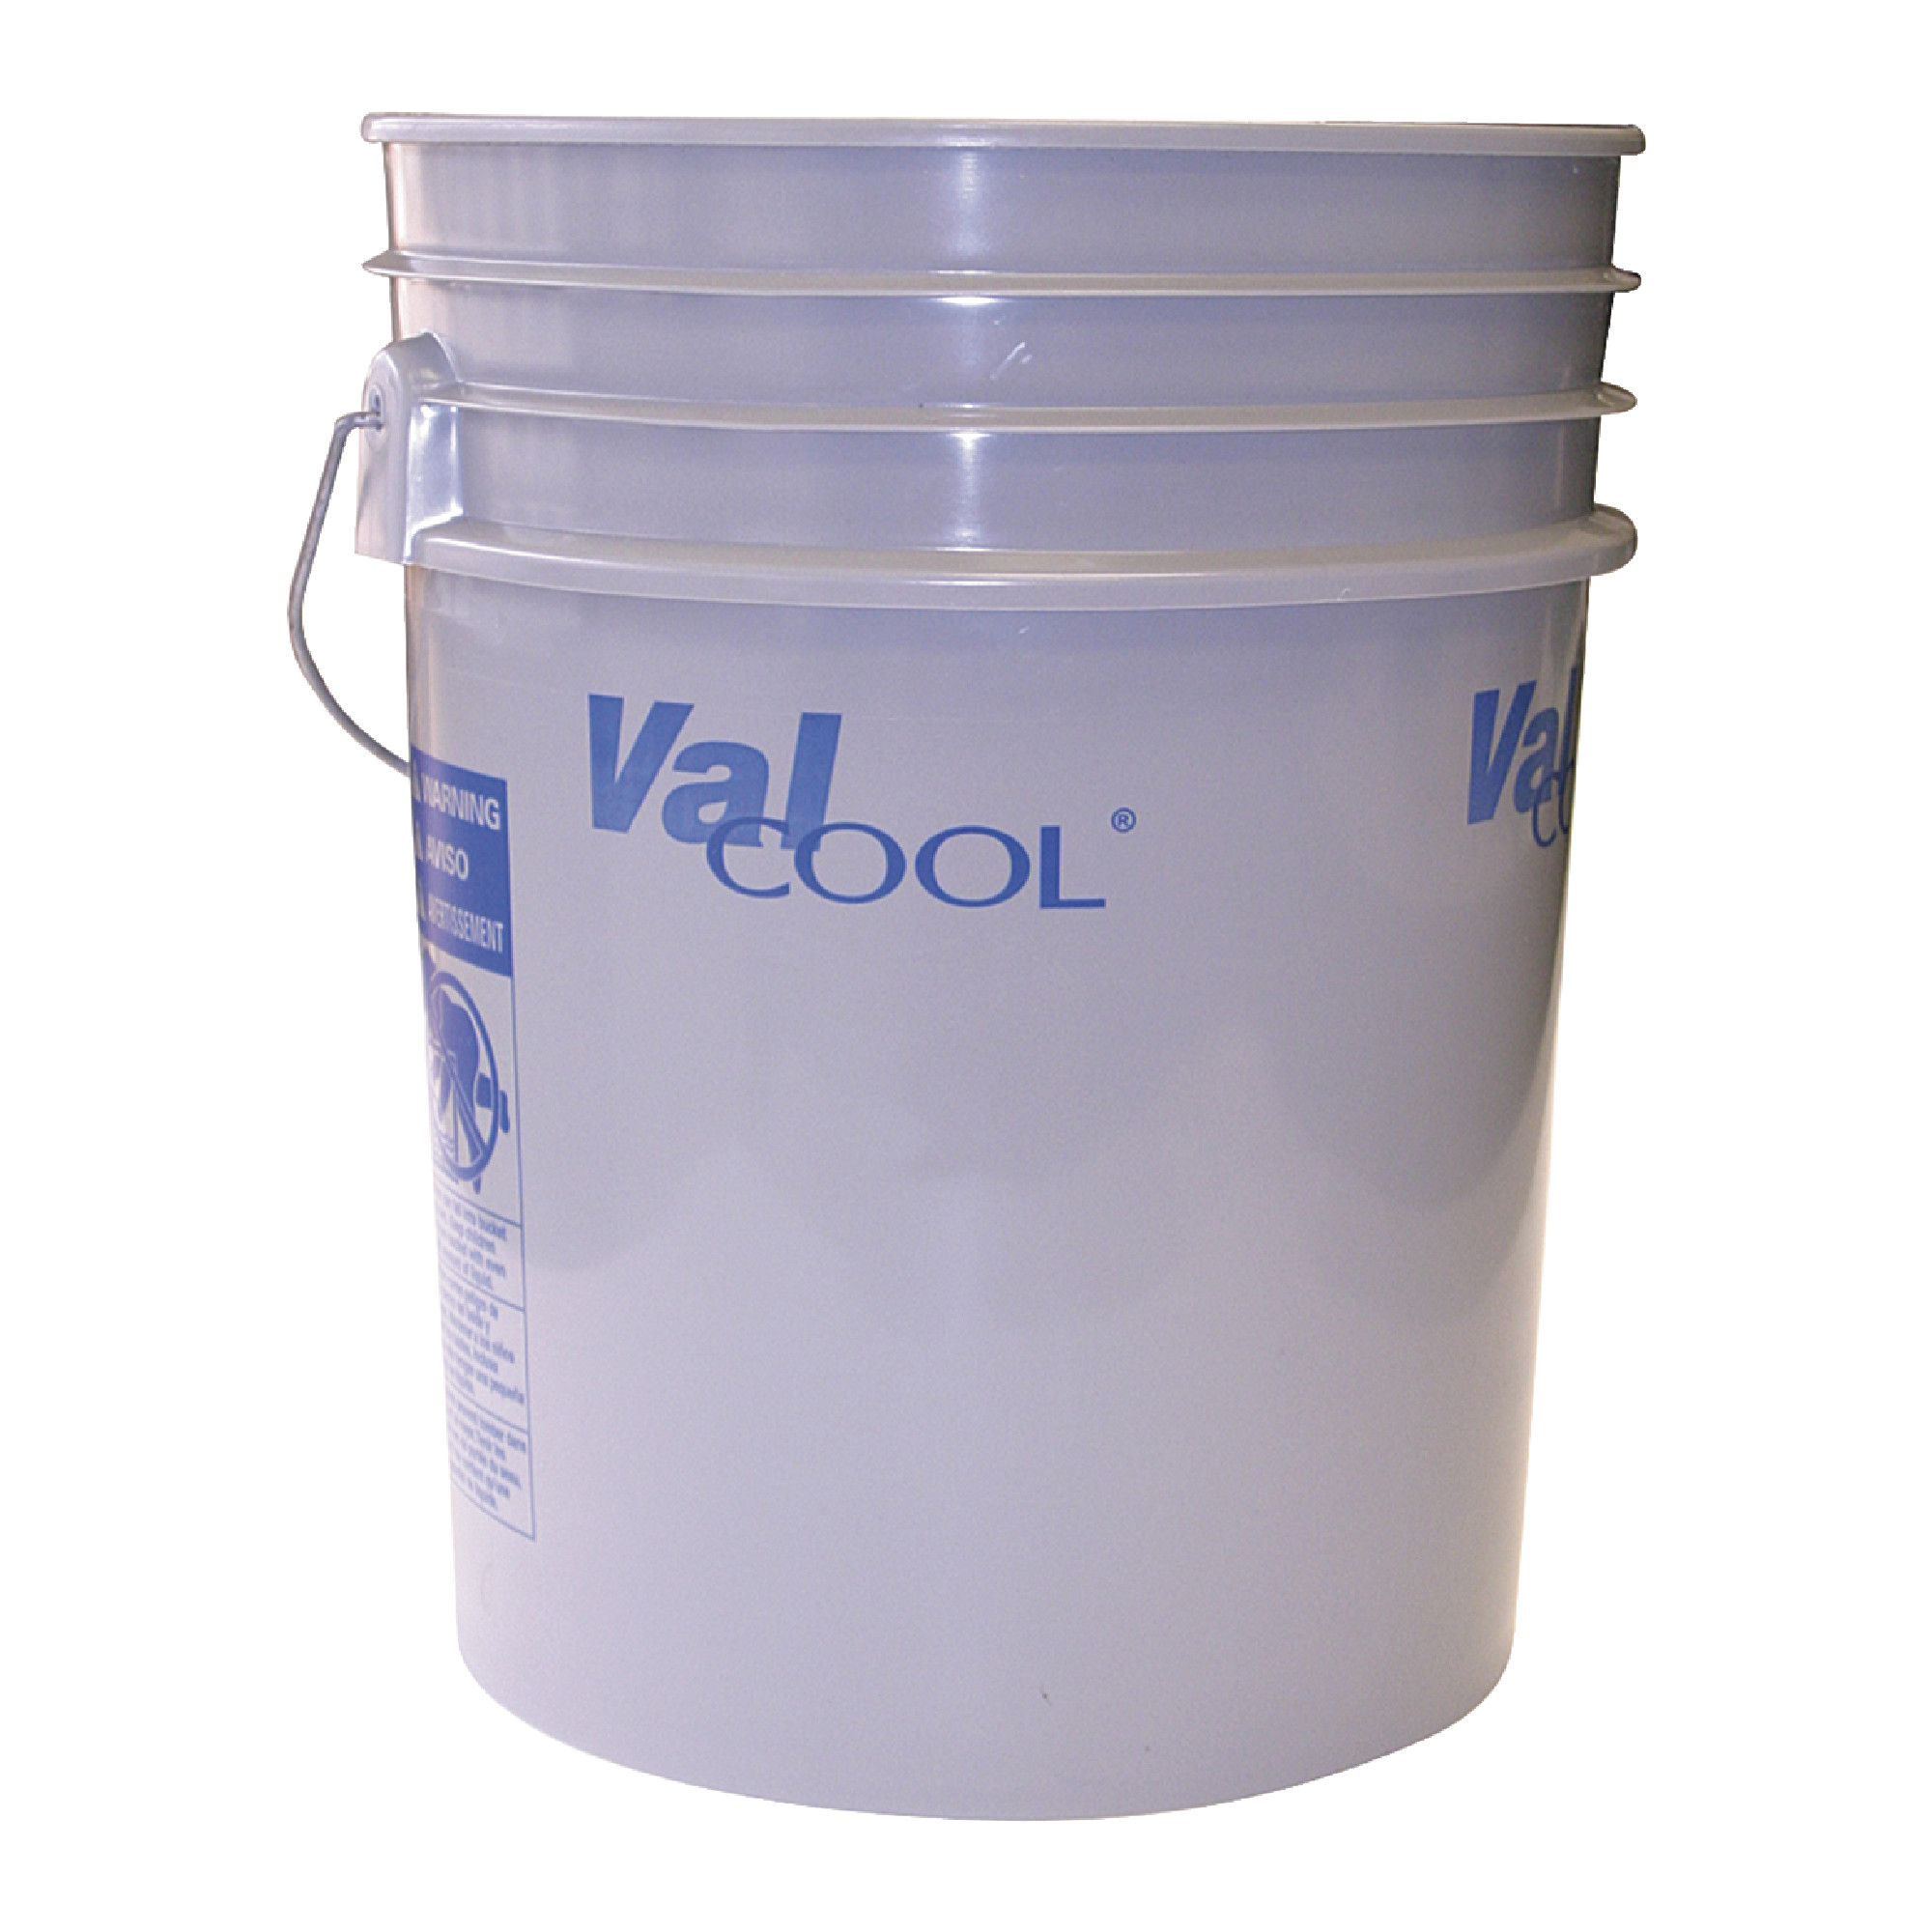 VALCOOL Val-Lube EP 460 EP Gear Oil